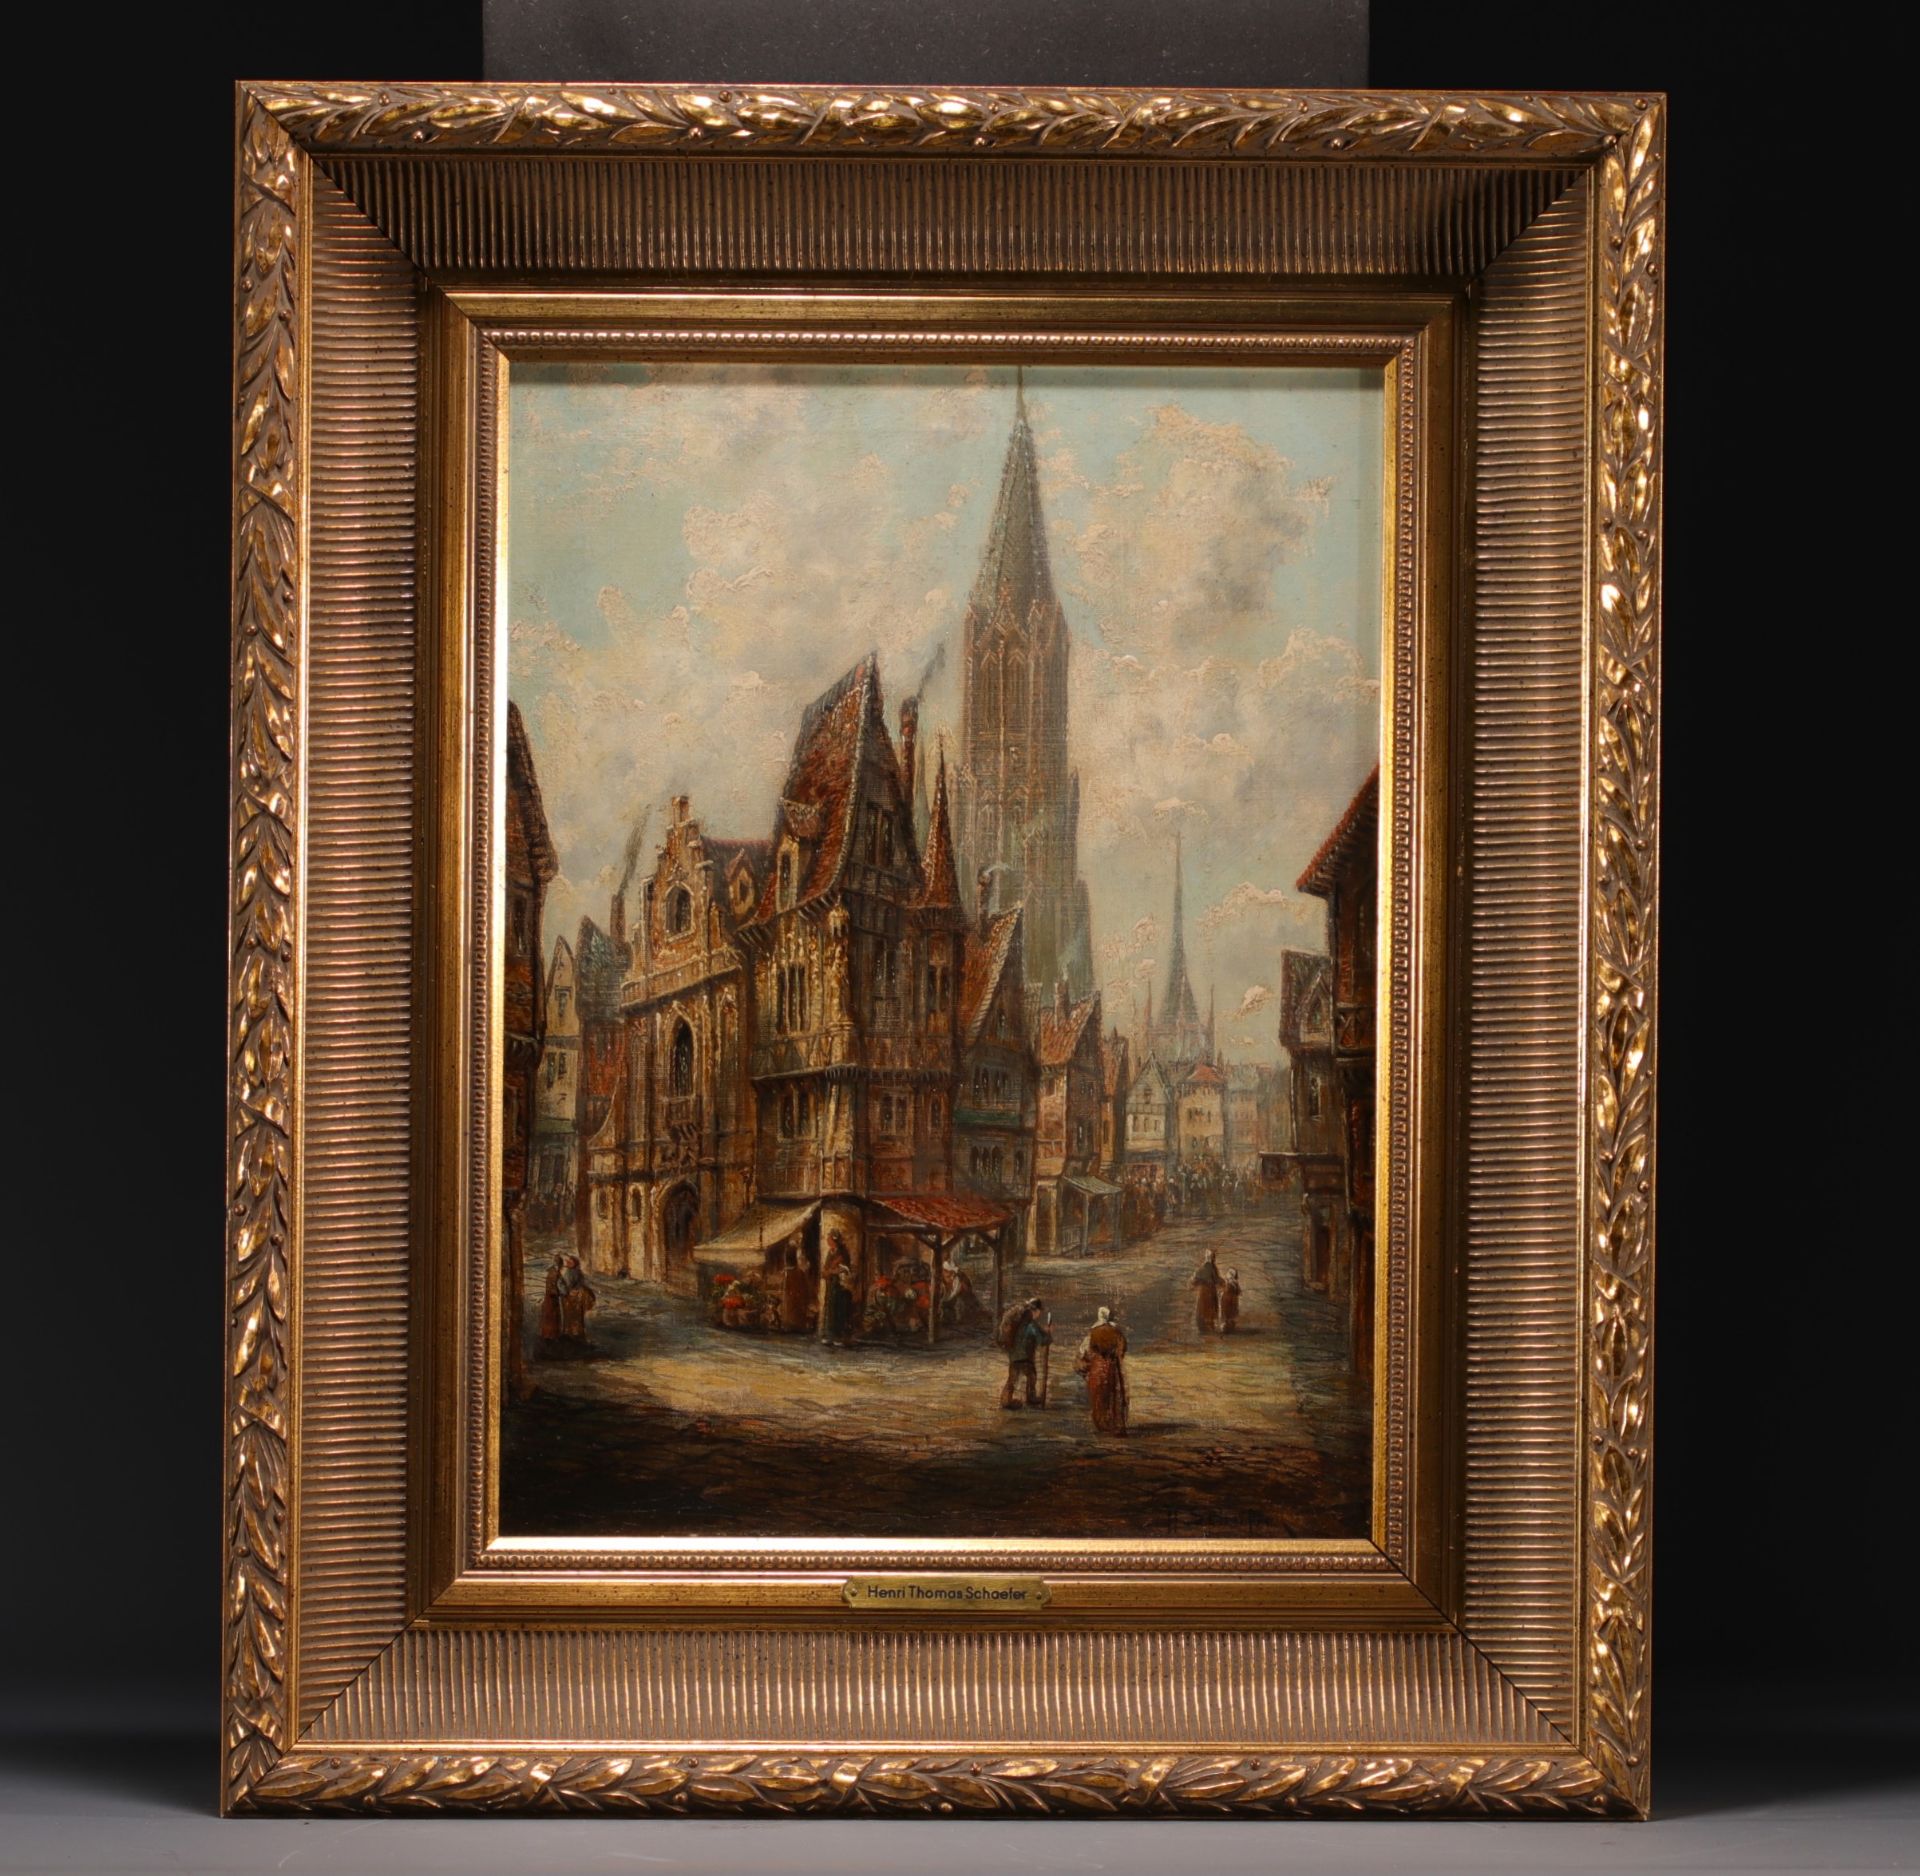 Henry Thomas SCHAEFER (1815-1873) "View of a French or German town" Oil on canvas. - Bild 2 aus 2